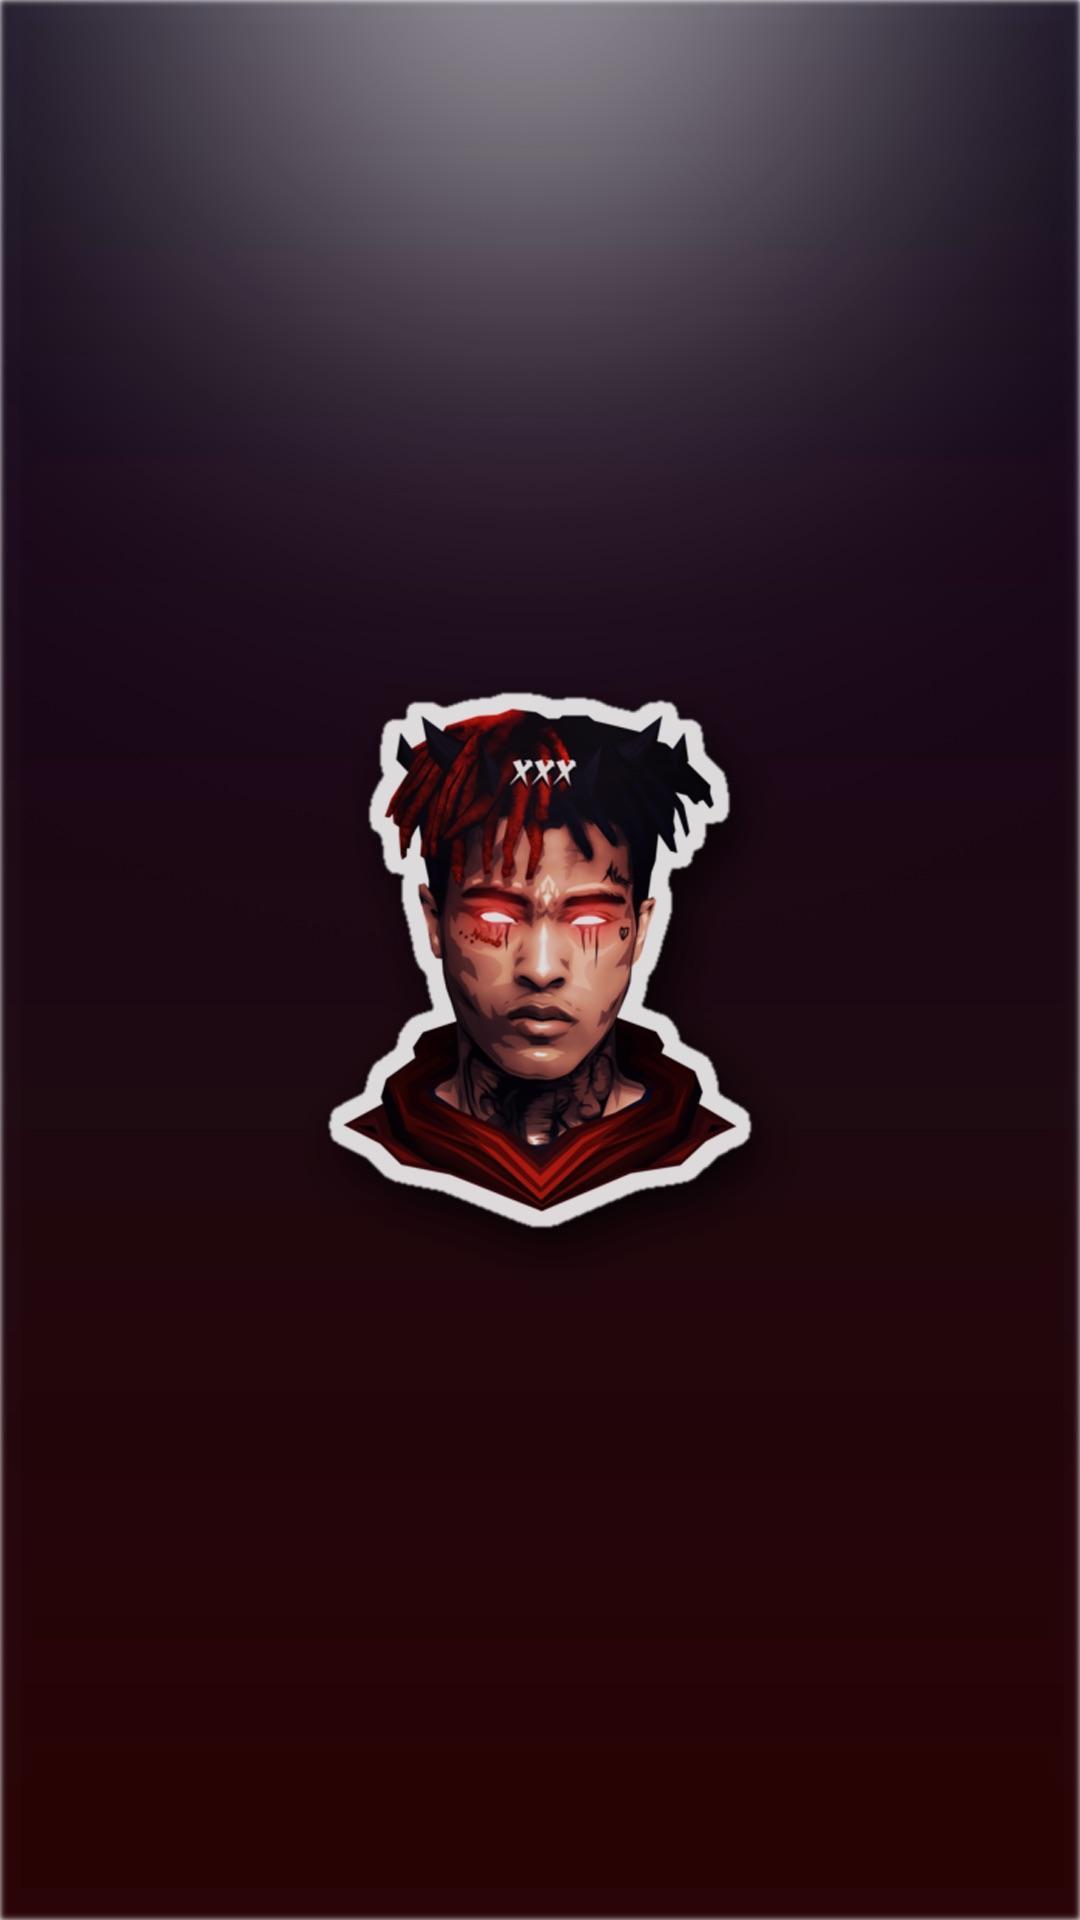 Made a X wallpapers